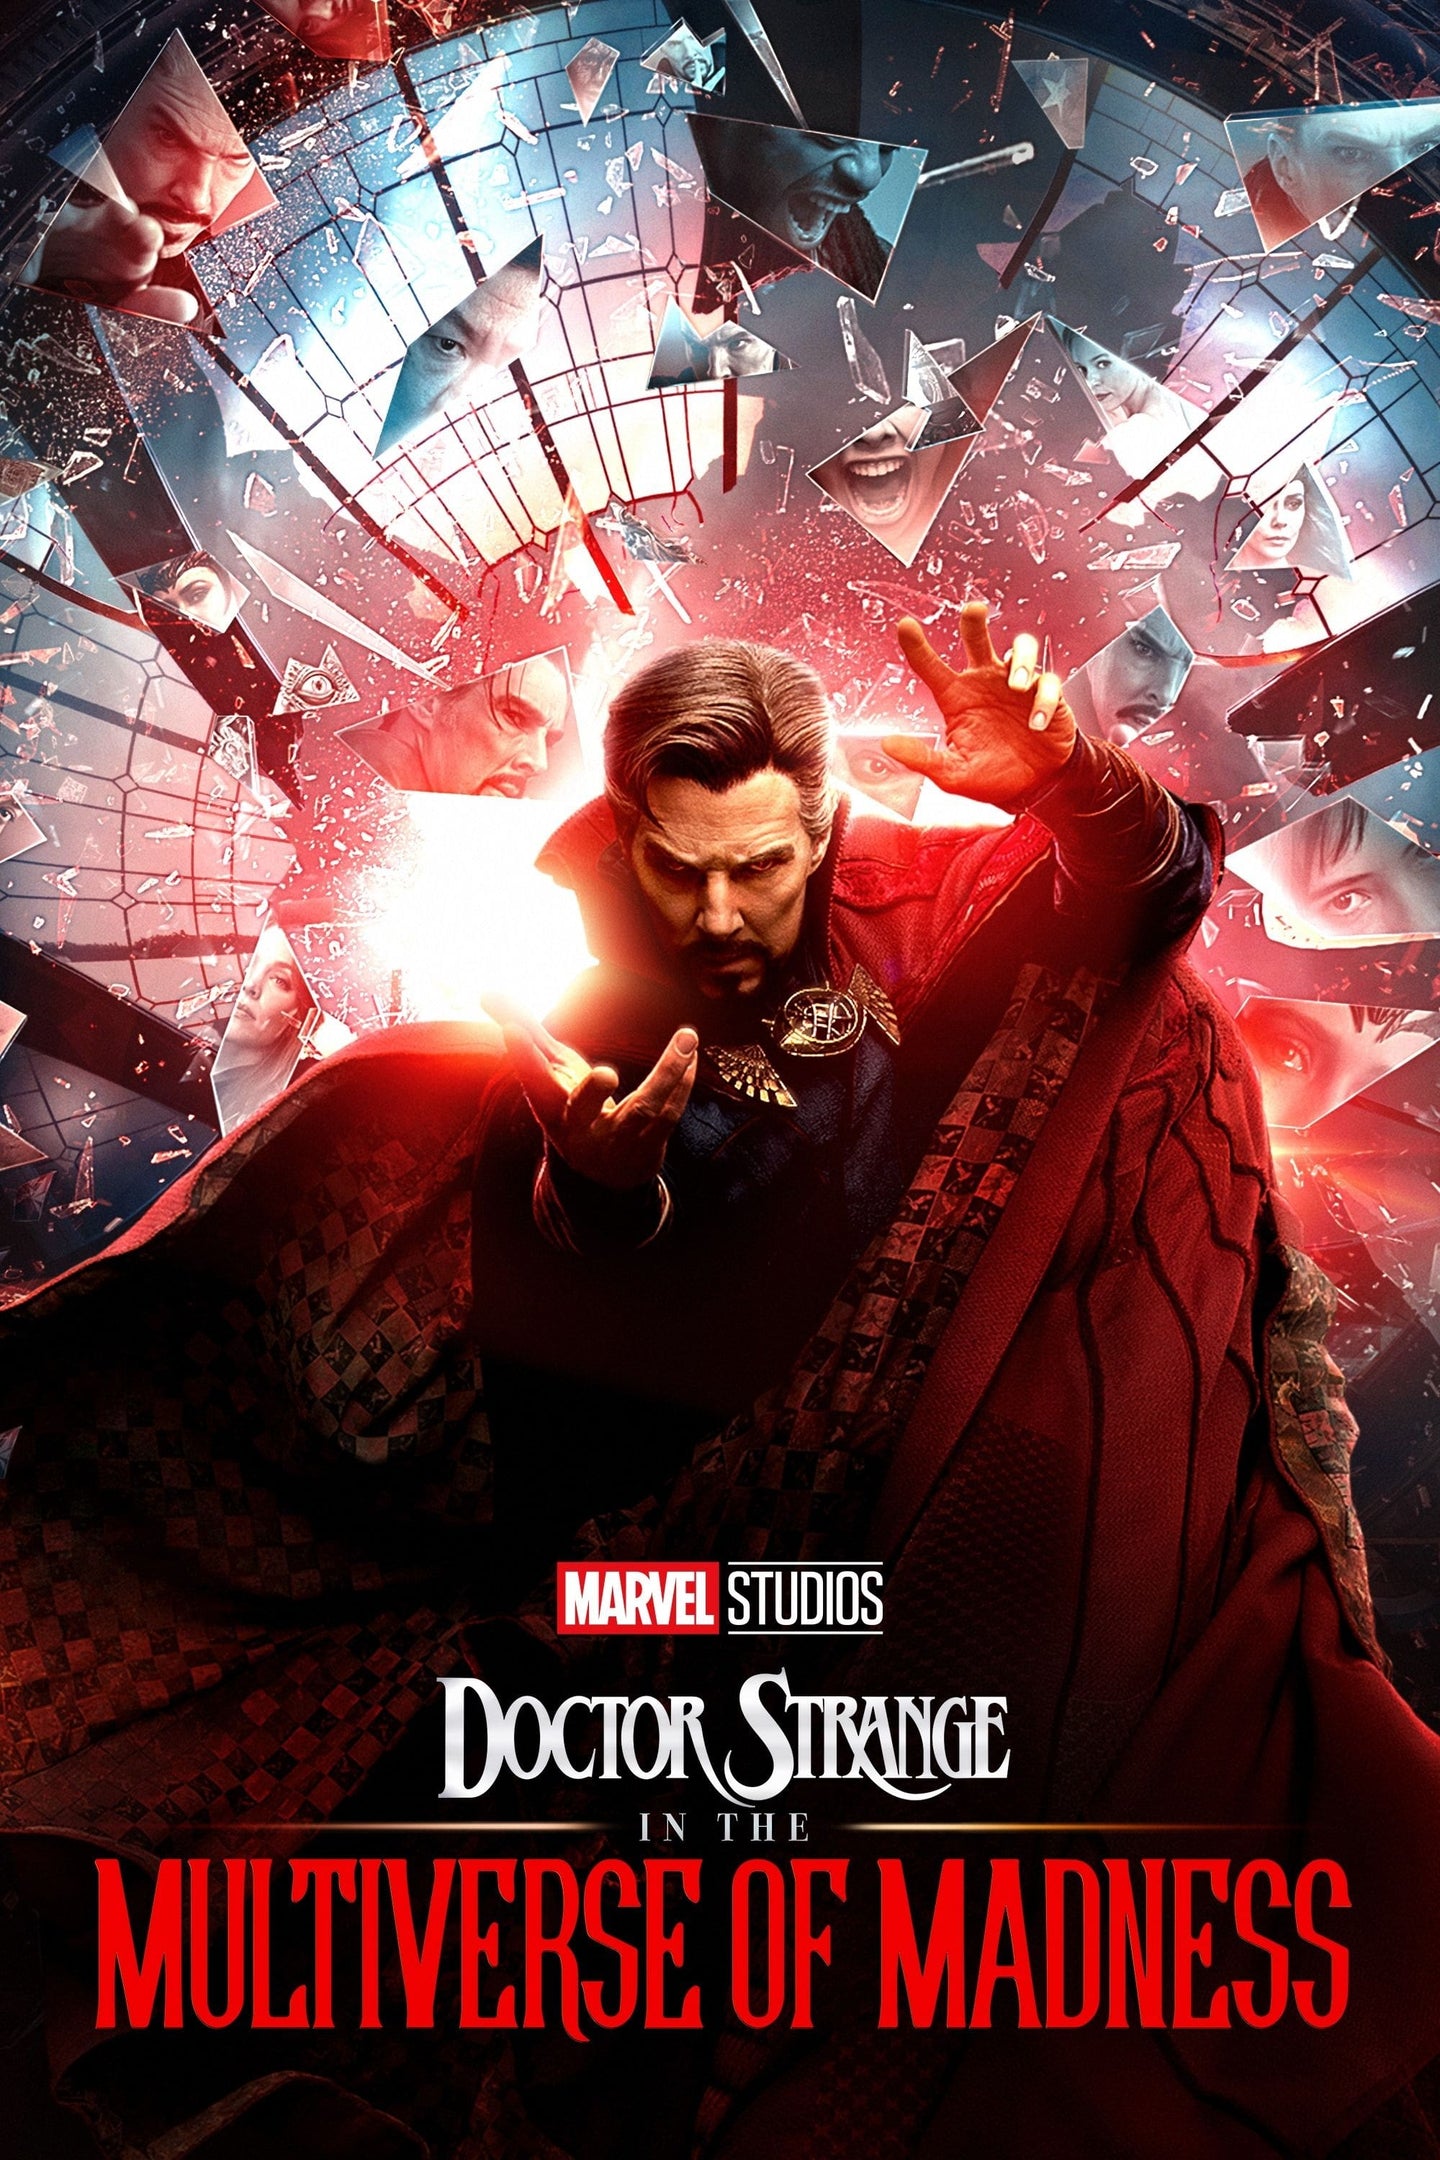 Doctor Strange In The Multiverse of Madness (2022: Ports Via MA) Google Play HD code